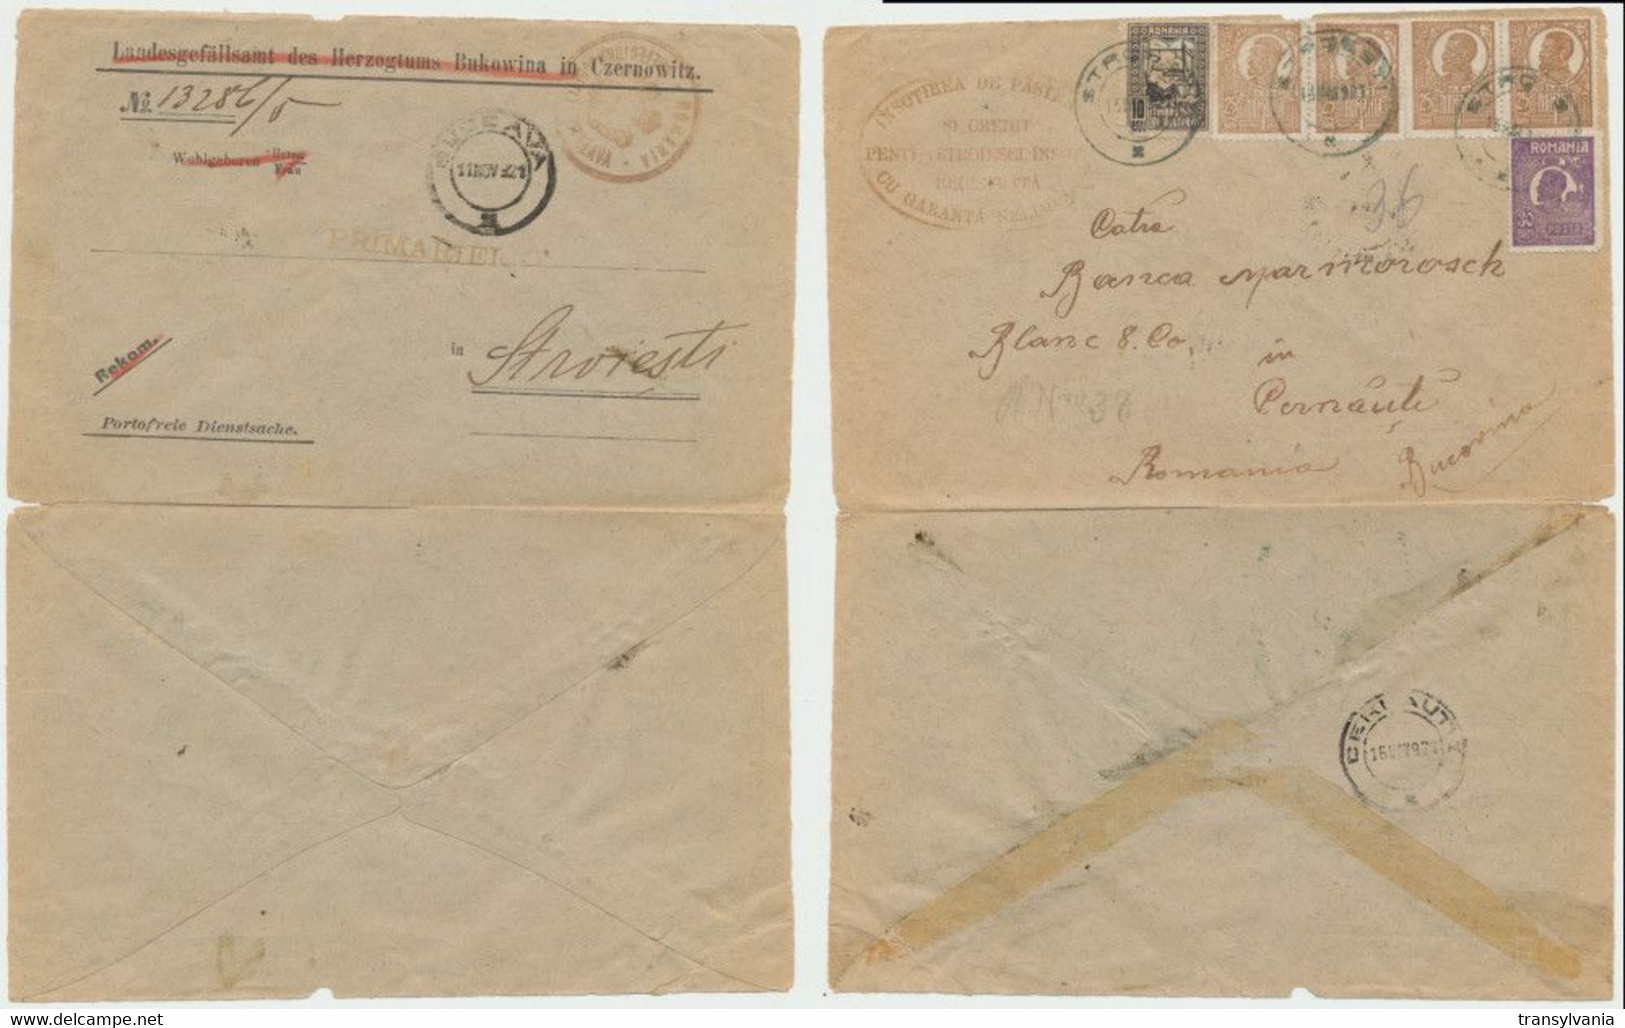 Austria Bukowina Now Ukraine Ex Offo Stationery Cover Romania 1921 Scarce Reusage On The Both Sides Czernowitz - Officials